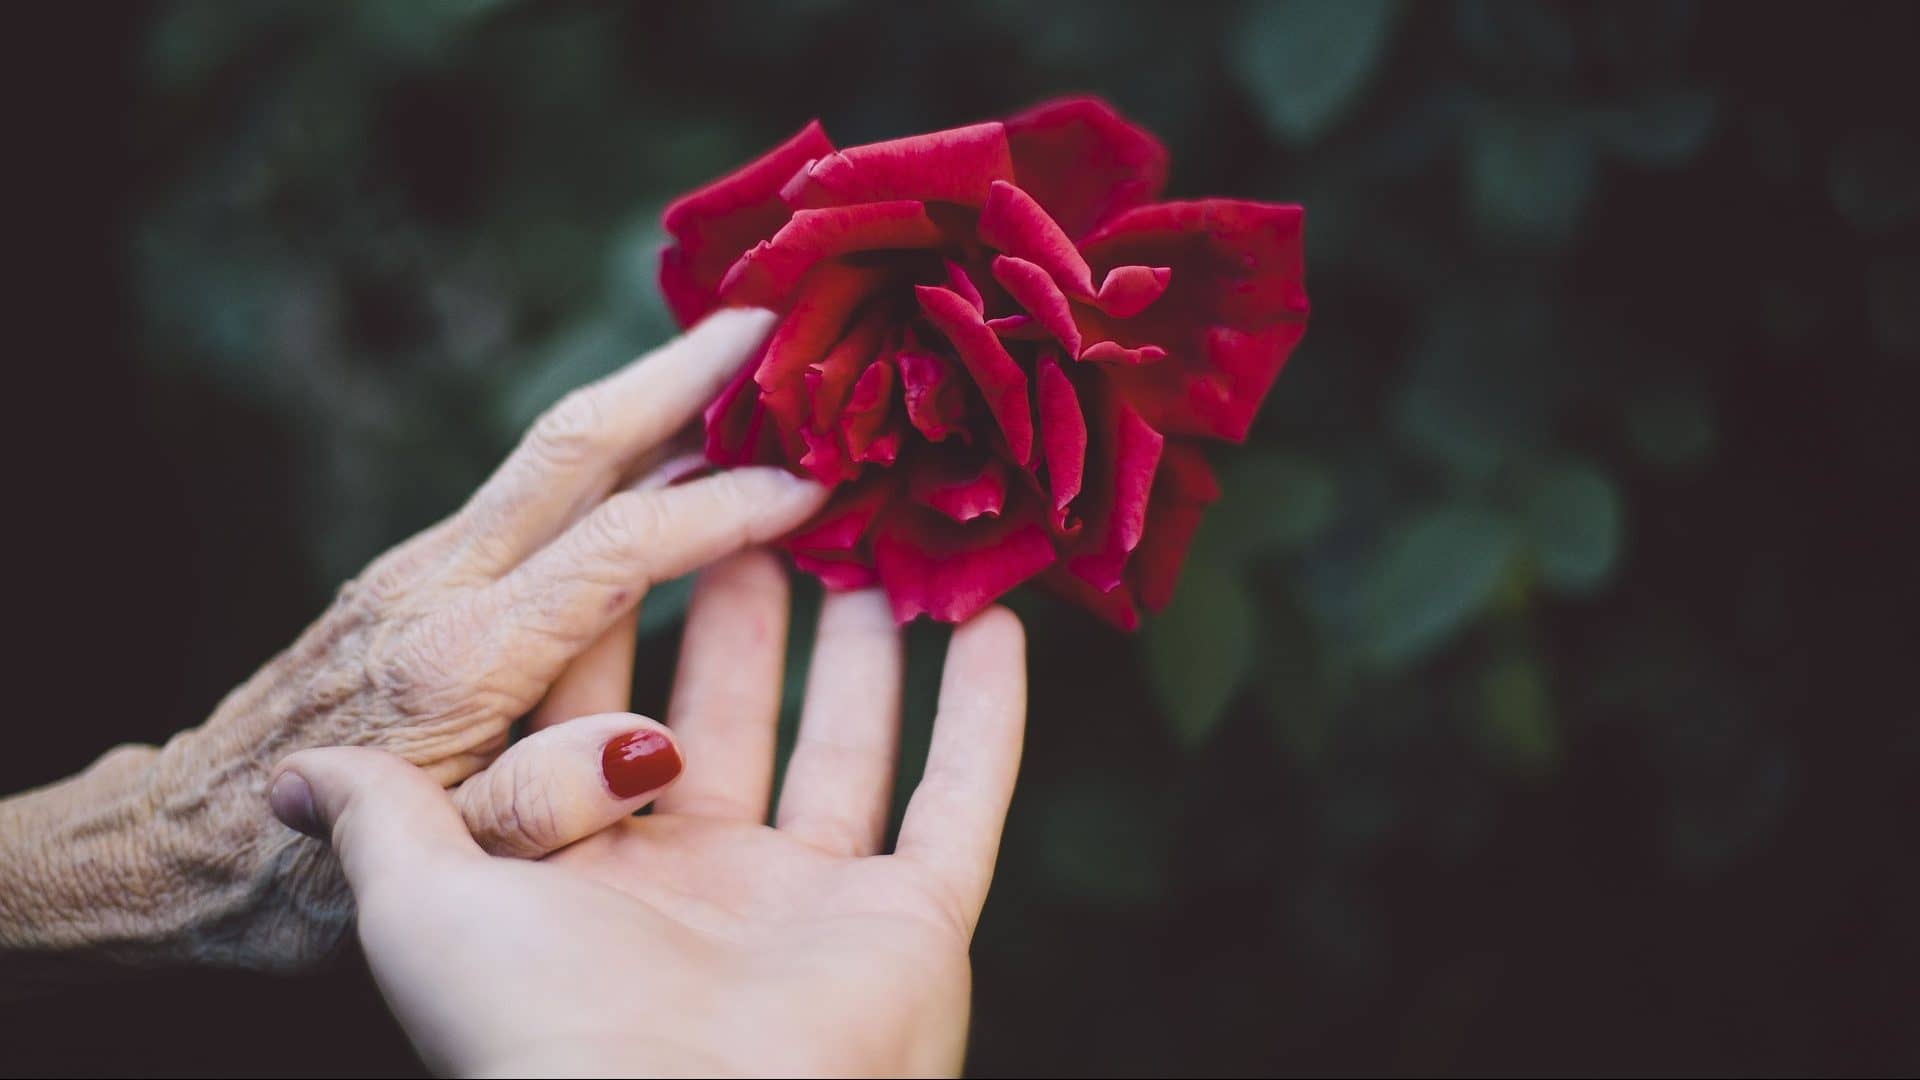 Image: An older and and a younger hand reach out to touch a red rose, HOPE.